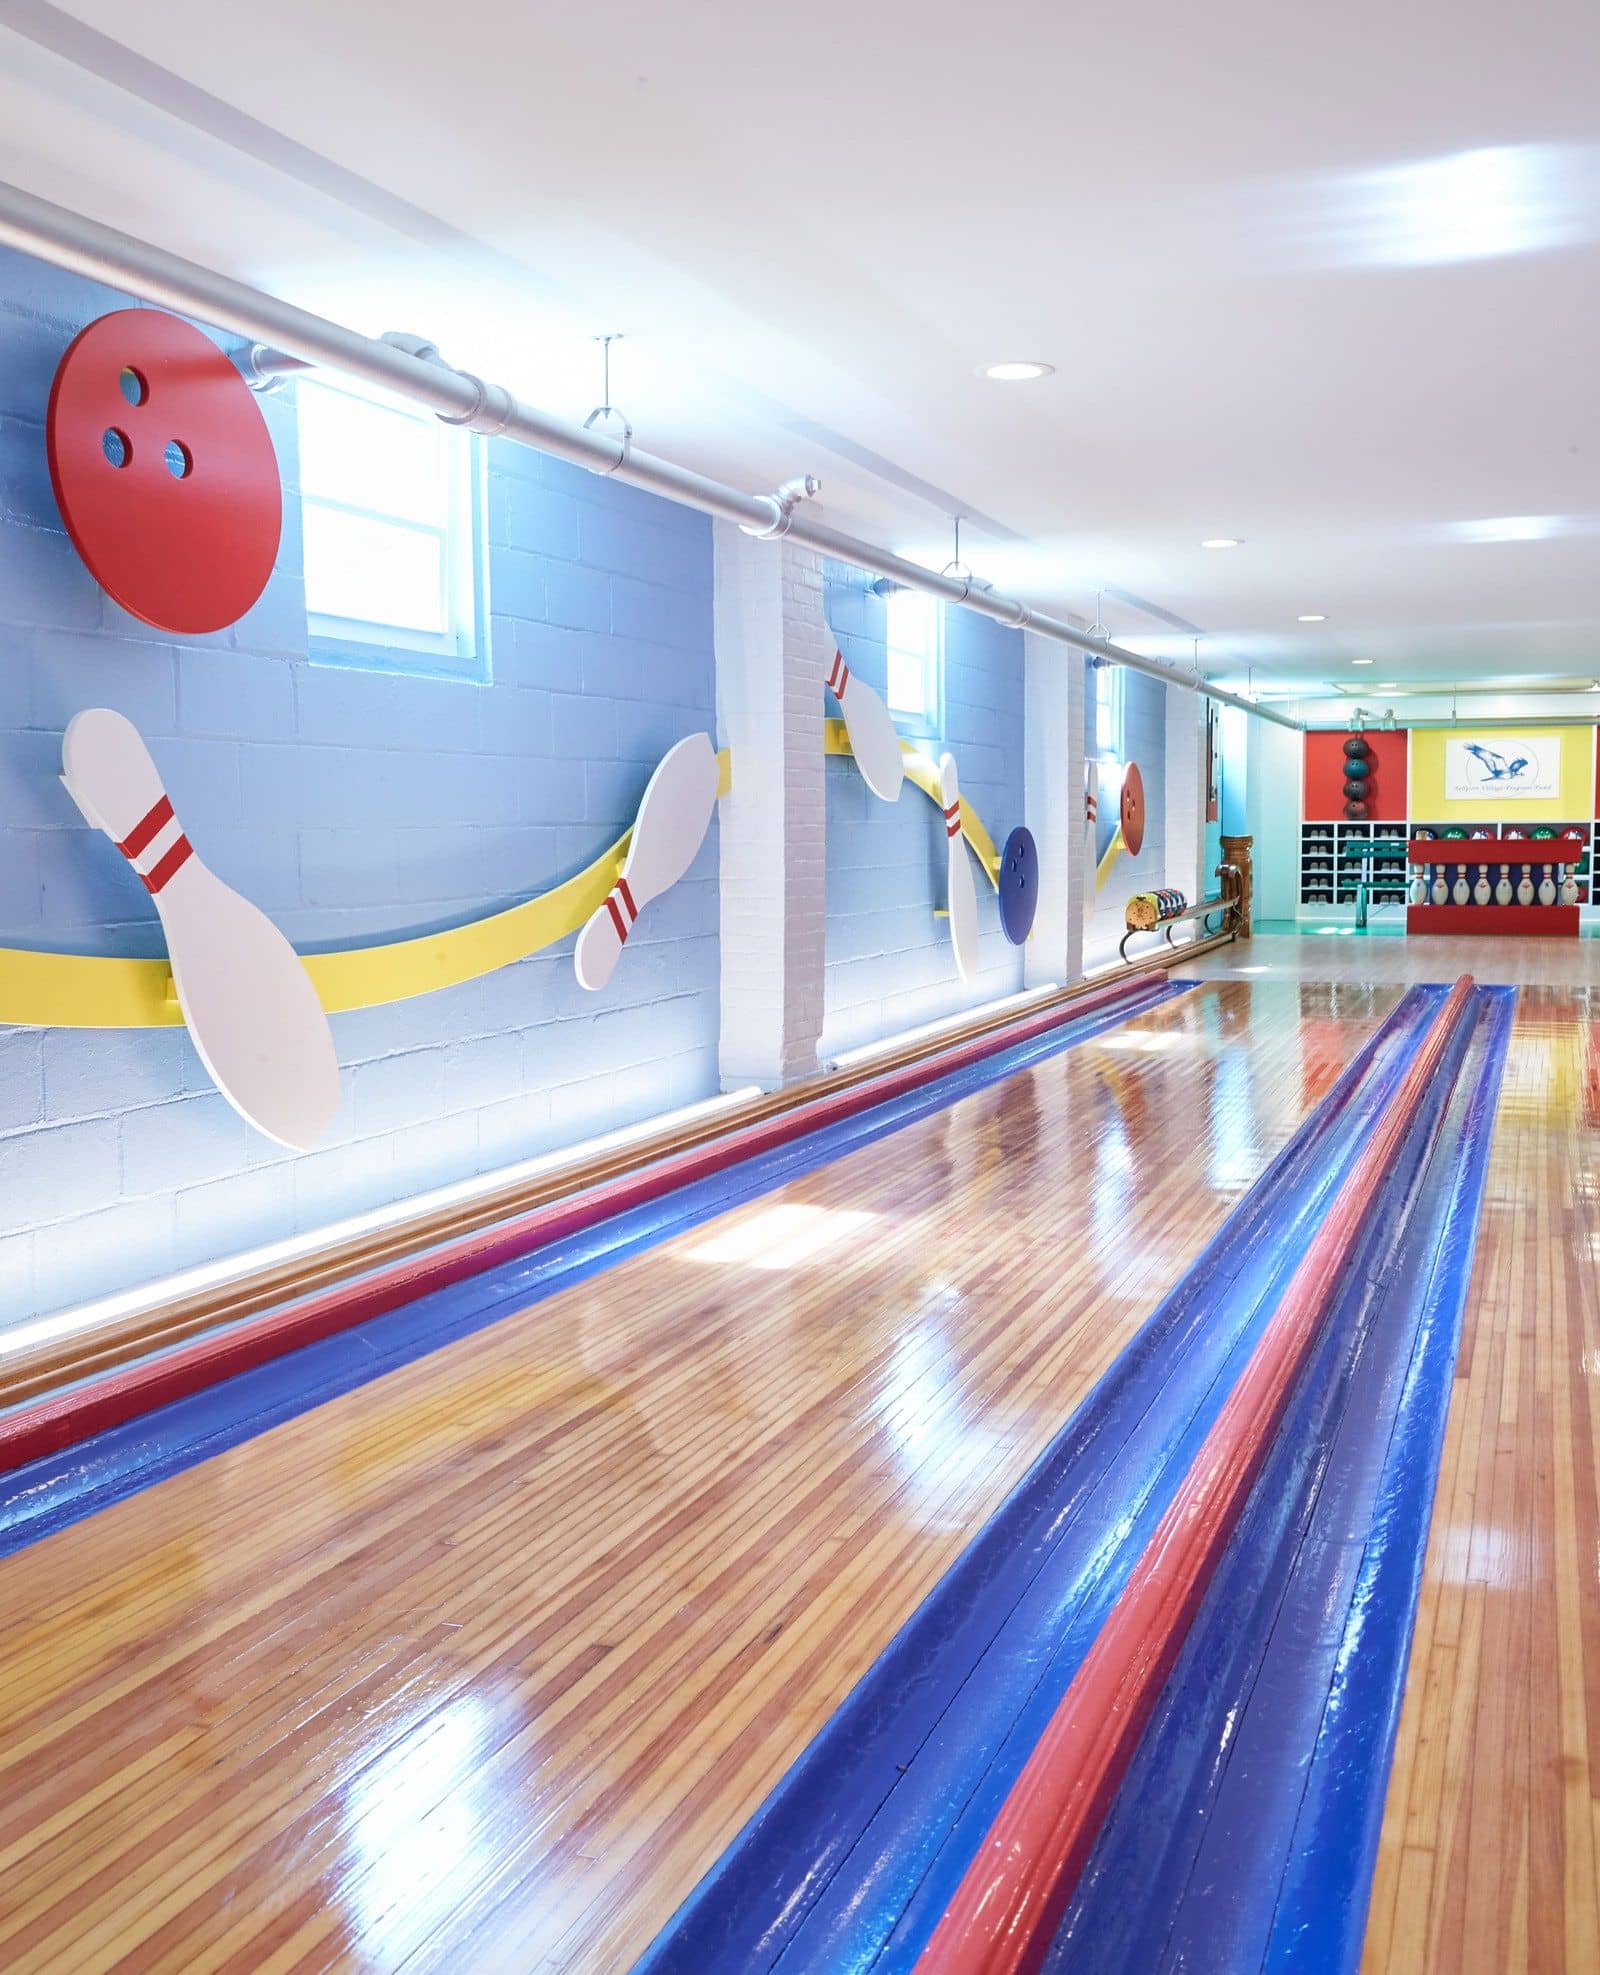 Today, the bowling alley's lanes sparkle like they did when it first opened. 